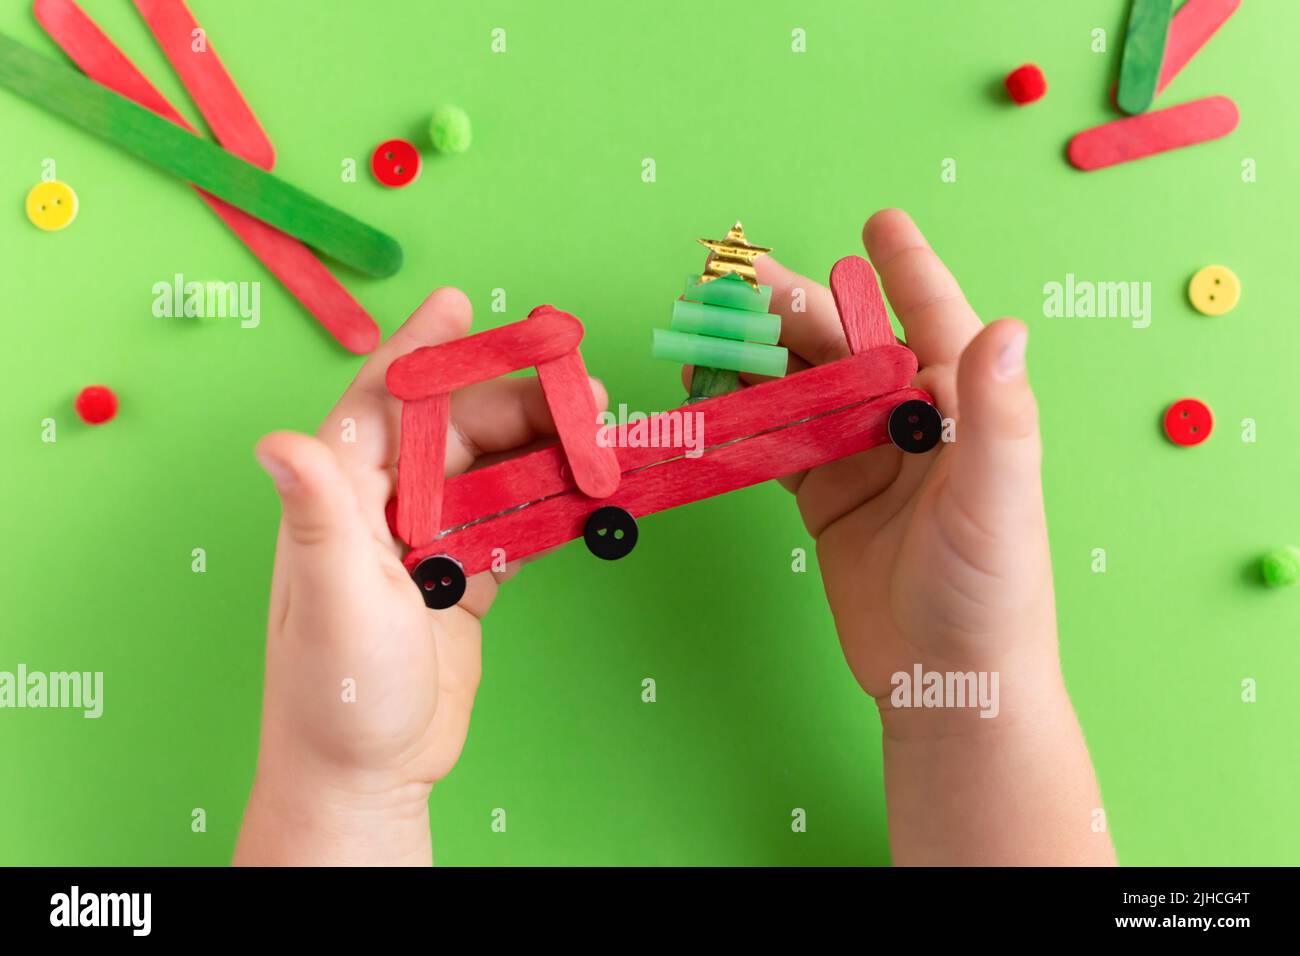 Red car with fir tree made from wooden sticks. Handmade. Project of children's creativity, handicrafts, crafts for kids. Child's hands Stock Photo